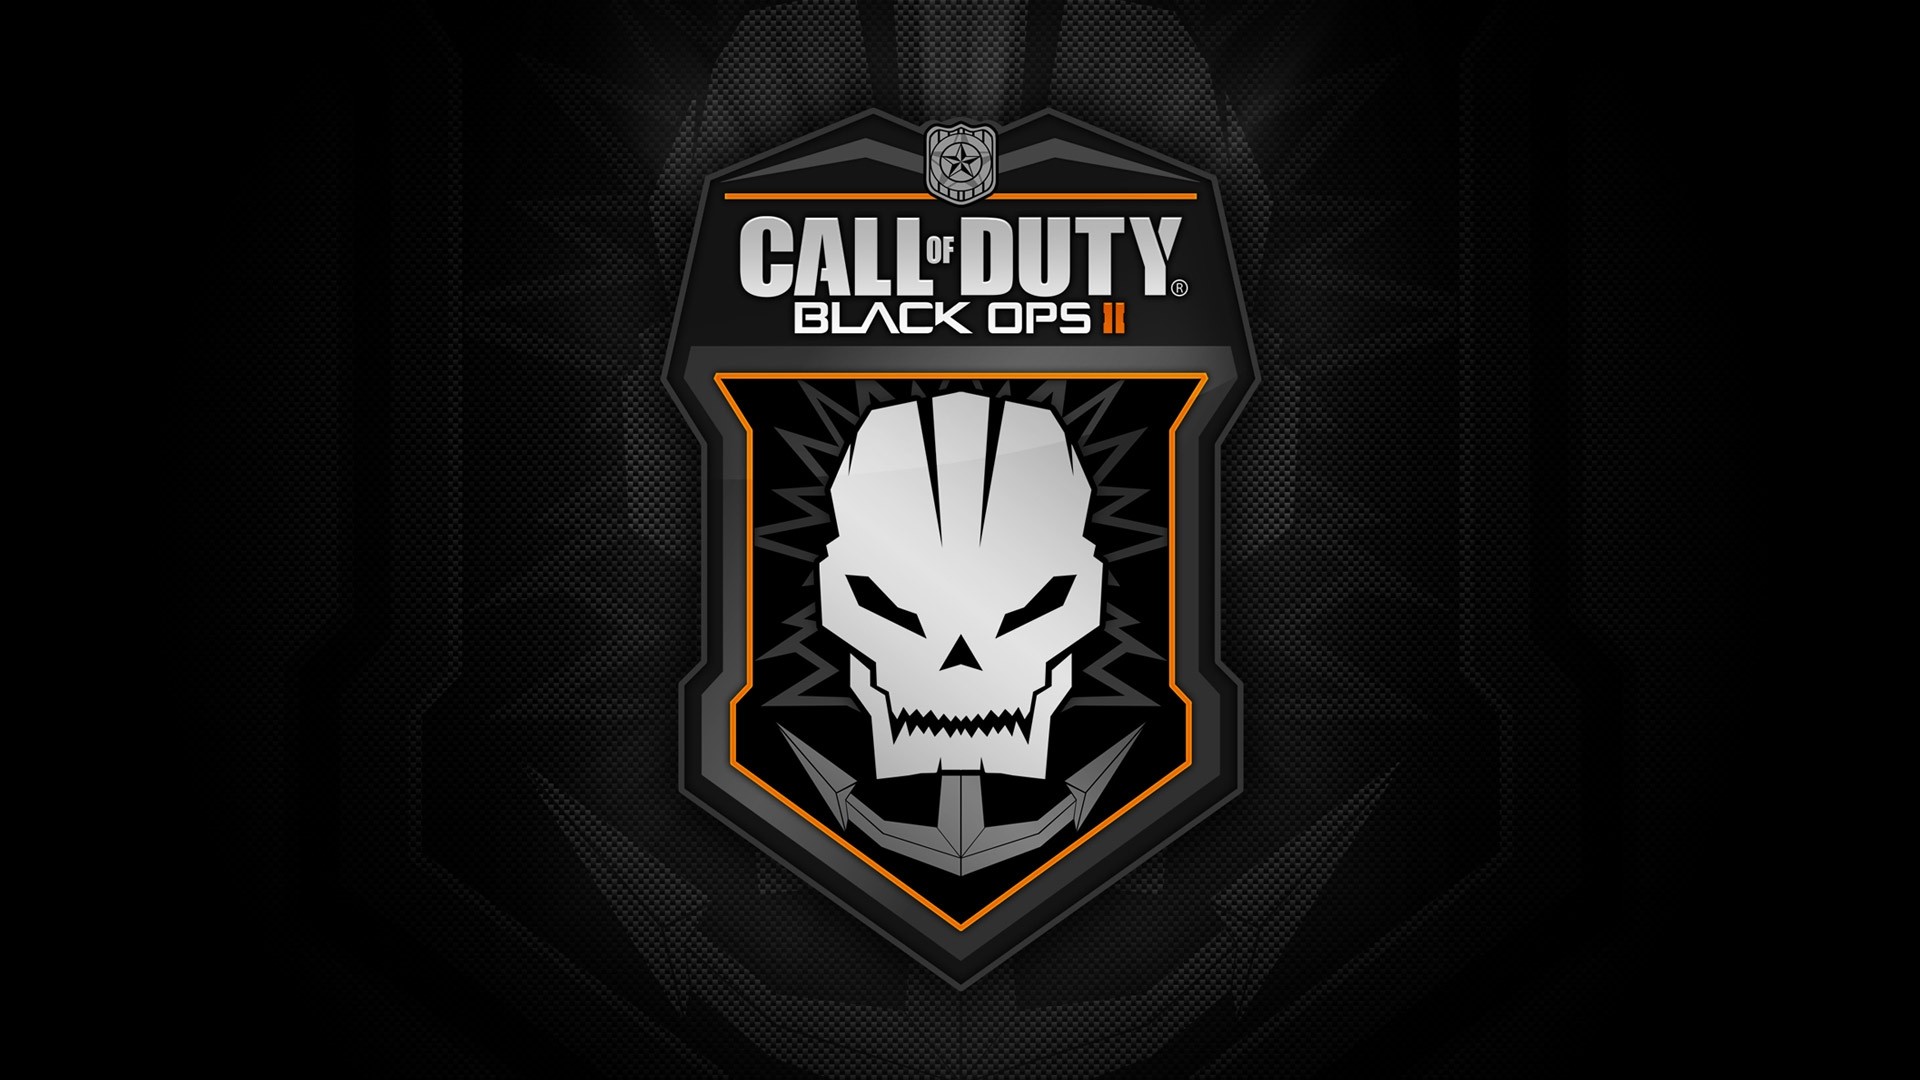 1920x1080 Download Black Ops 3 Wallpaper Call of Duty 35